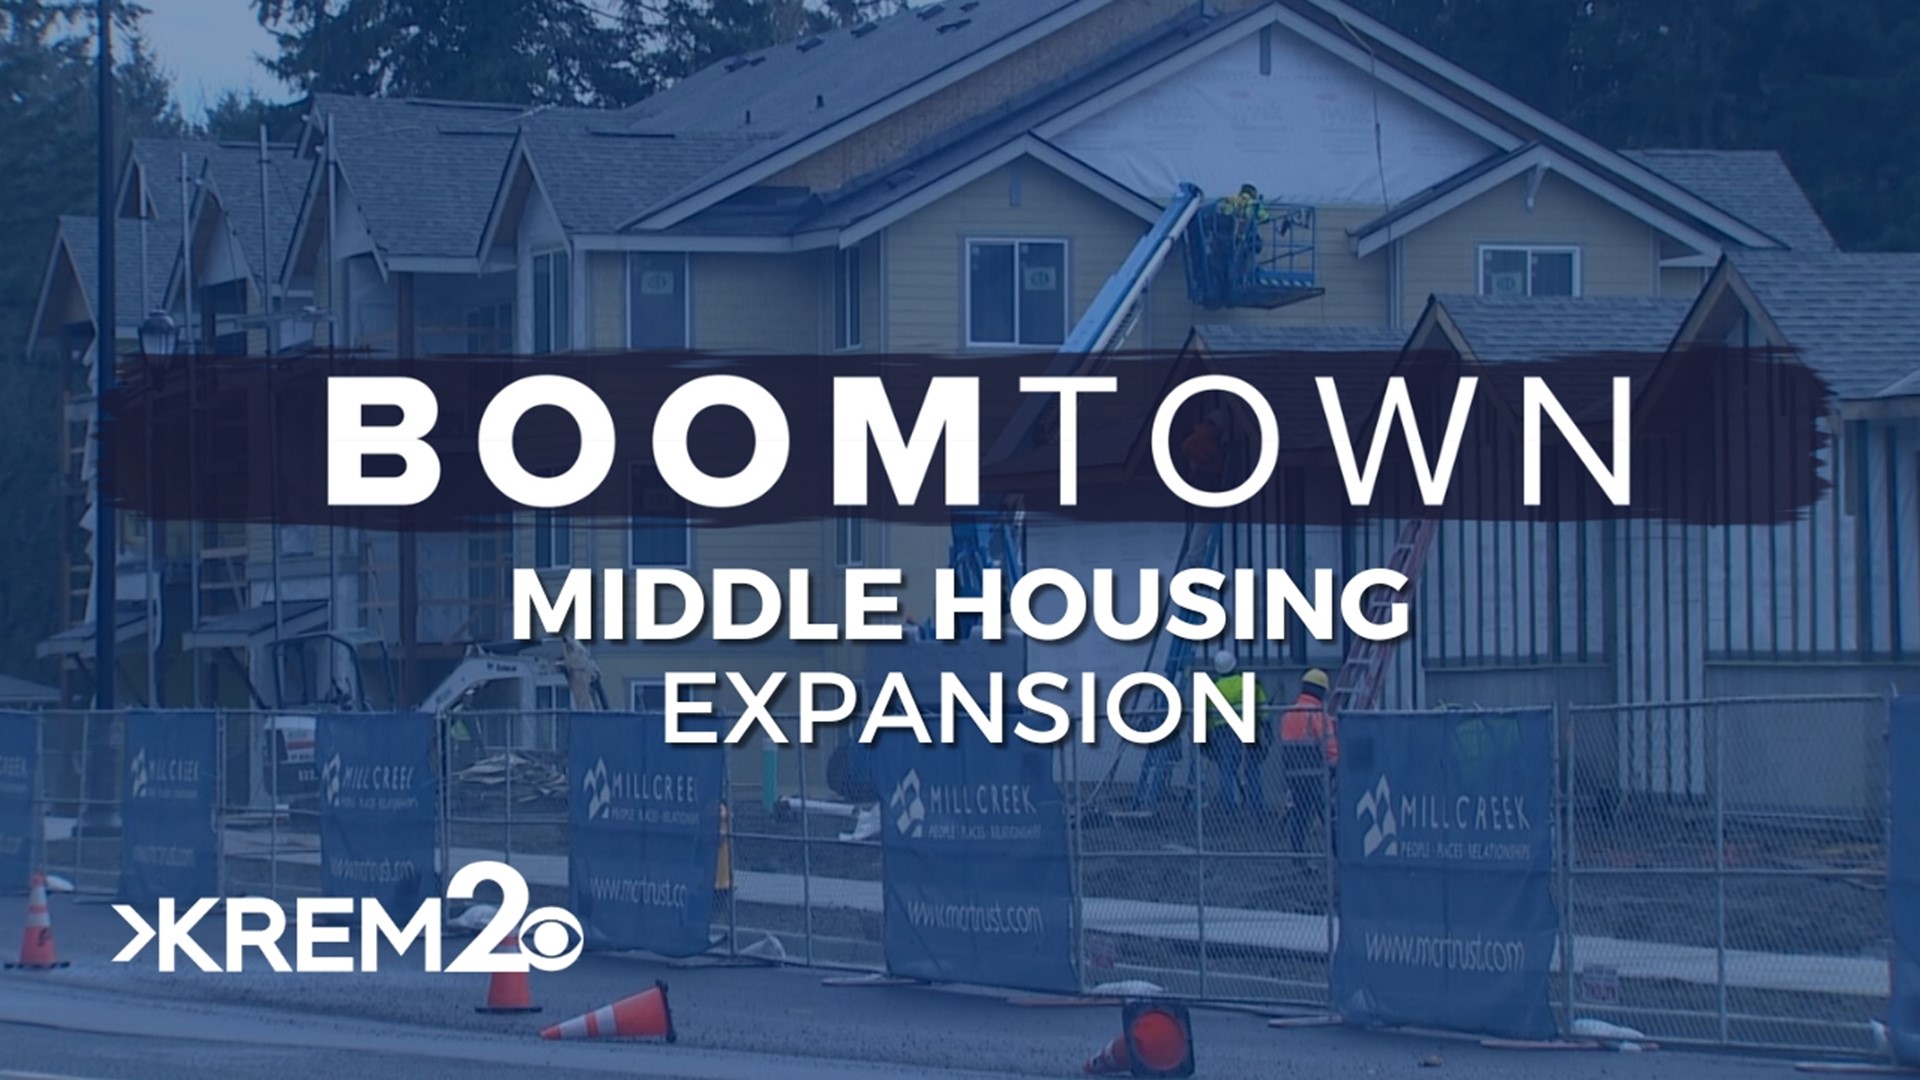 The new law allows townhomes, duplexes, up to six-plexes to be built in more places.